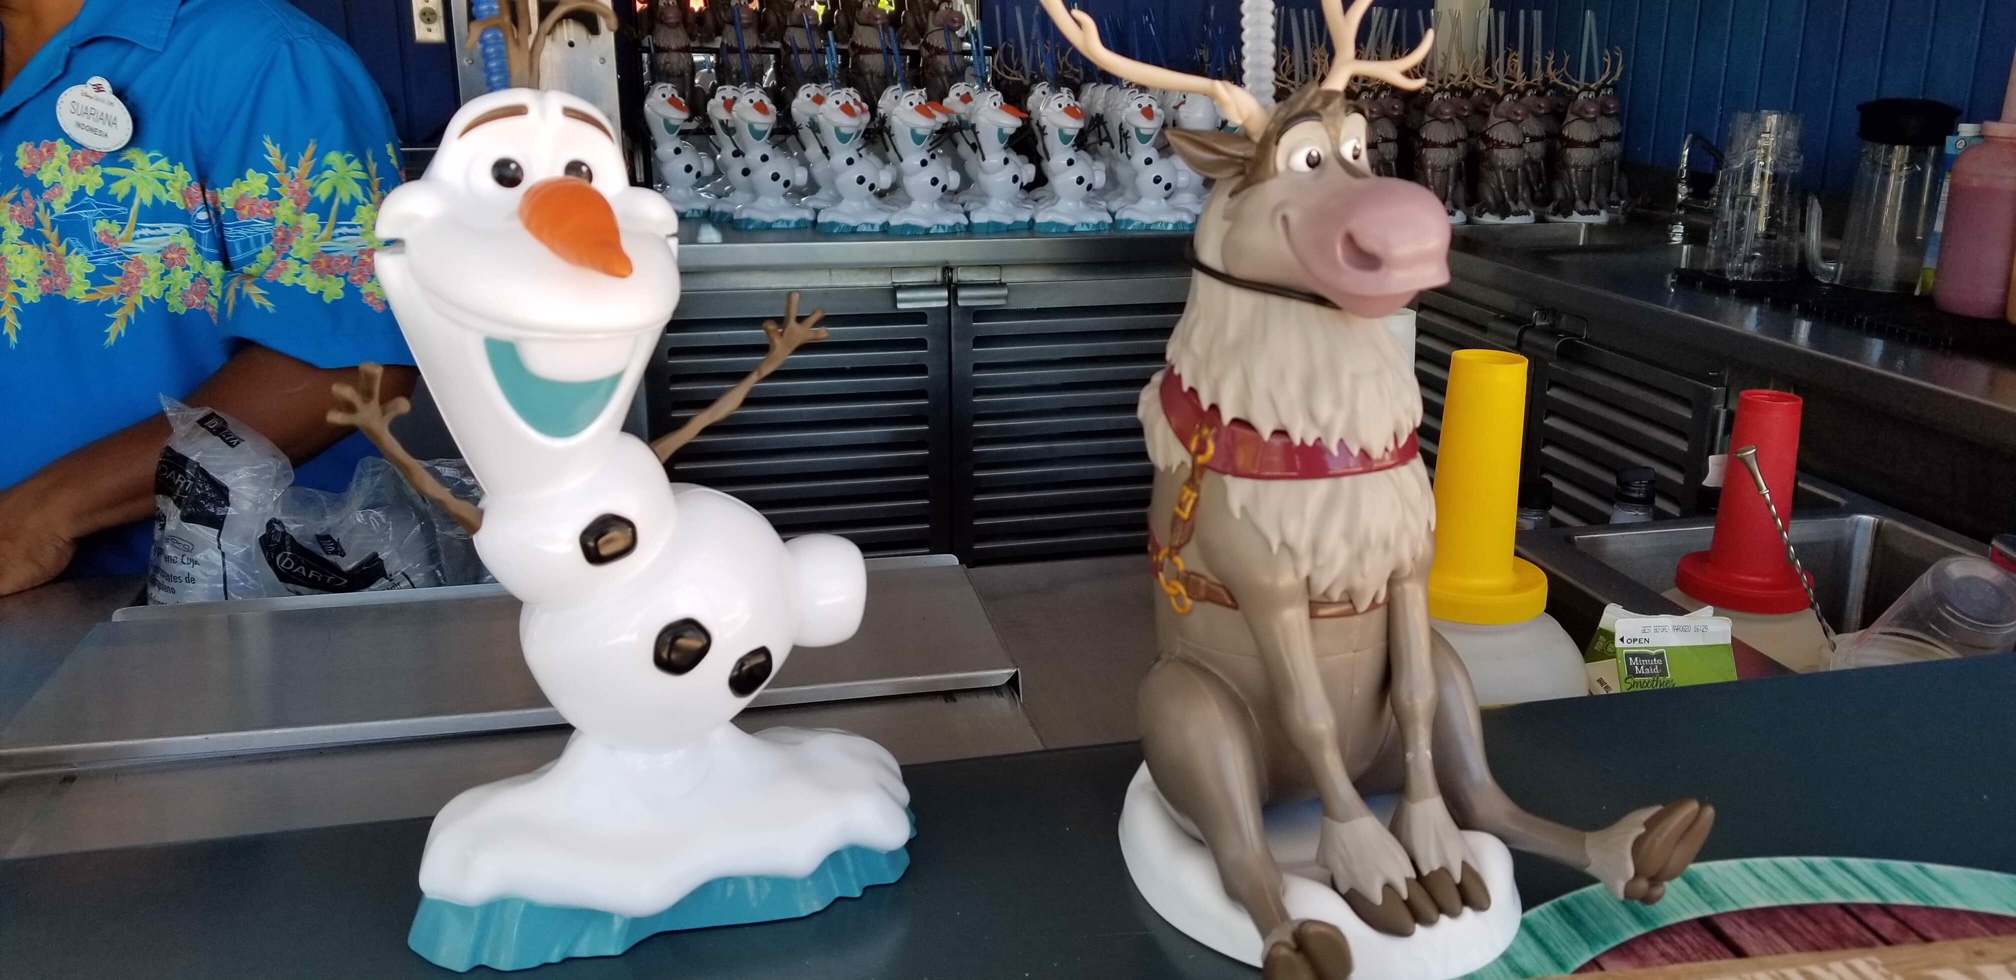 Enjoy a Cold Beverage with Olaf or Sven at Disney’s Castaway Cay